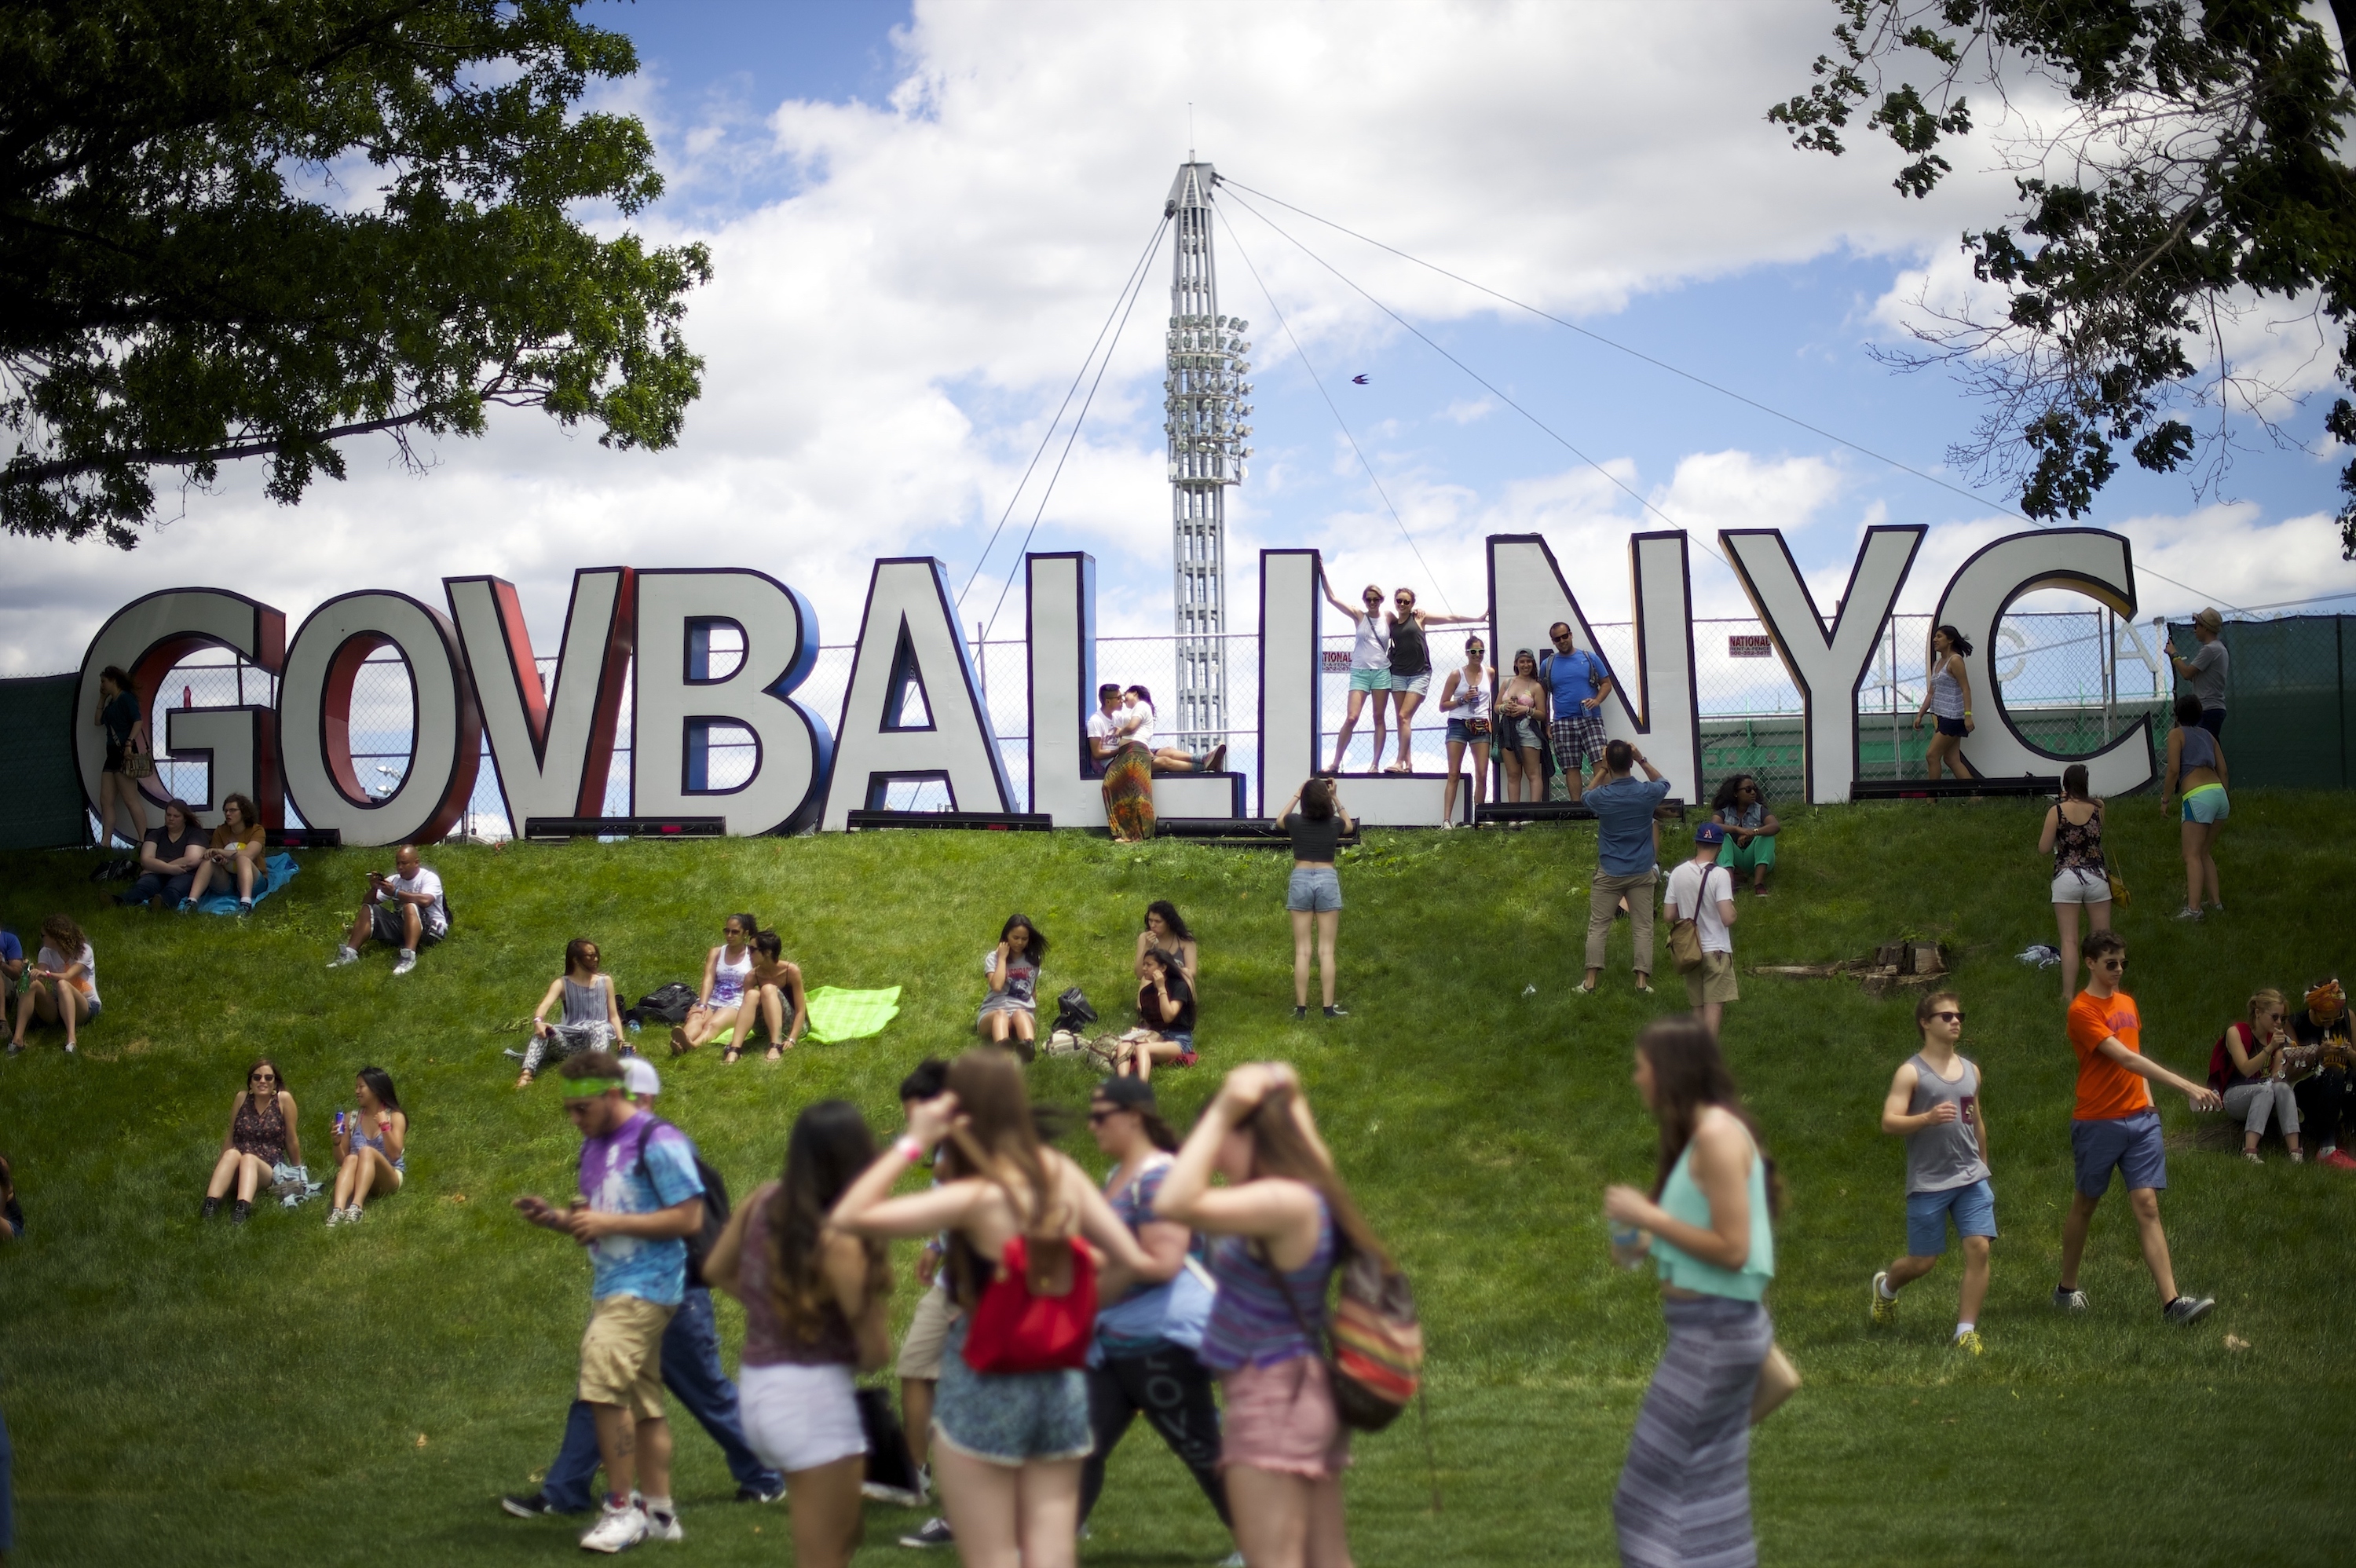 Attendees gather near the hilltop sign of the Governors Ball Music Festival